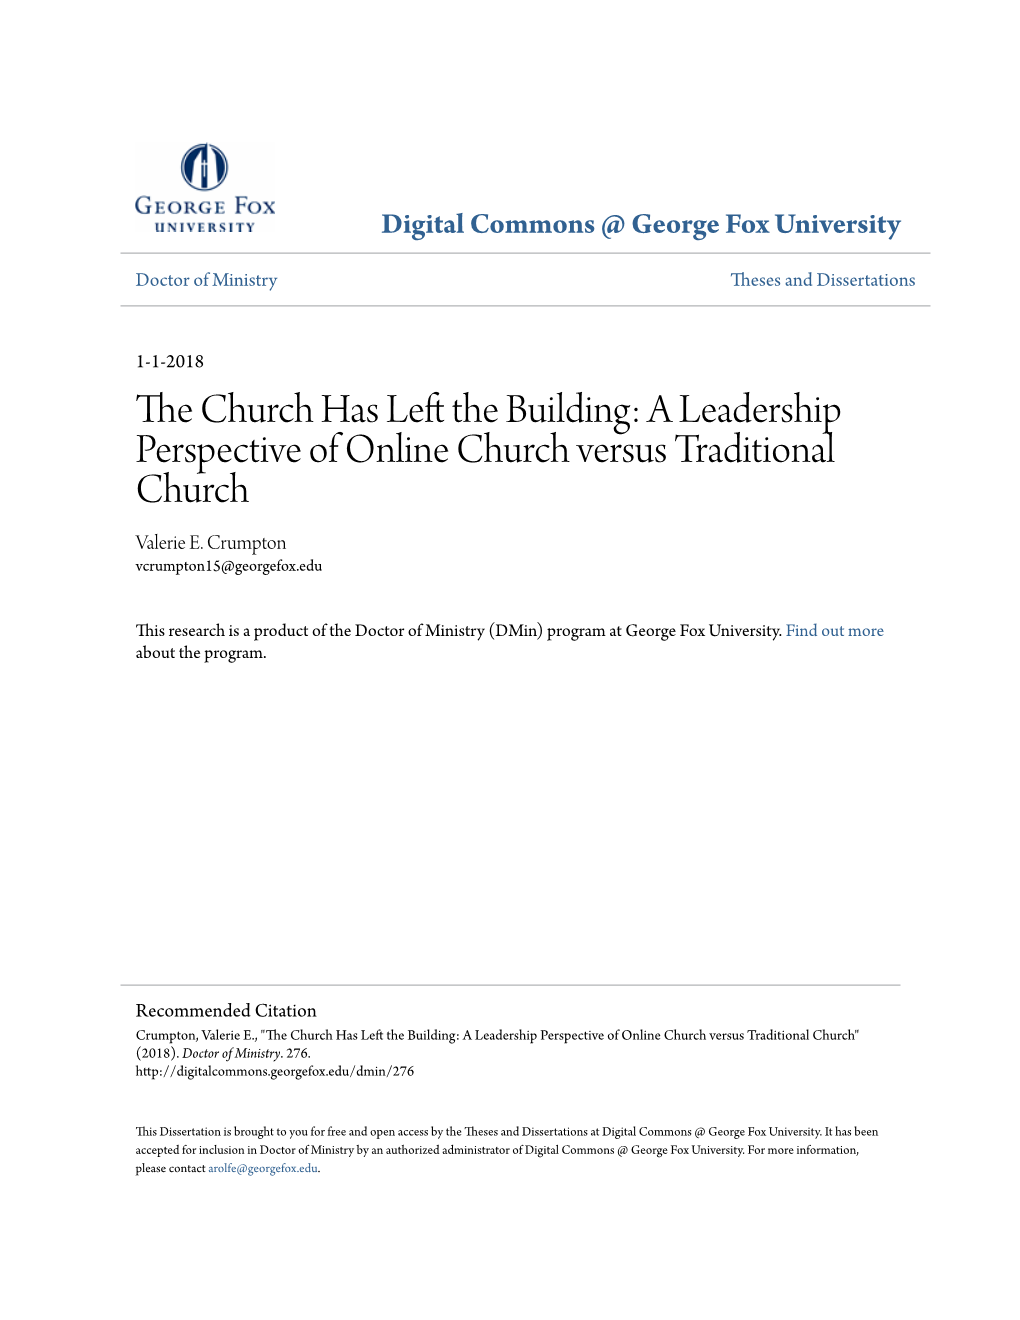 A Leadership Perspective of Online Church Versus Traditional Church Valerie E